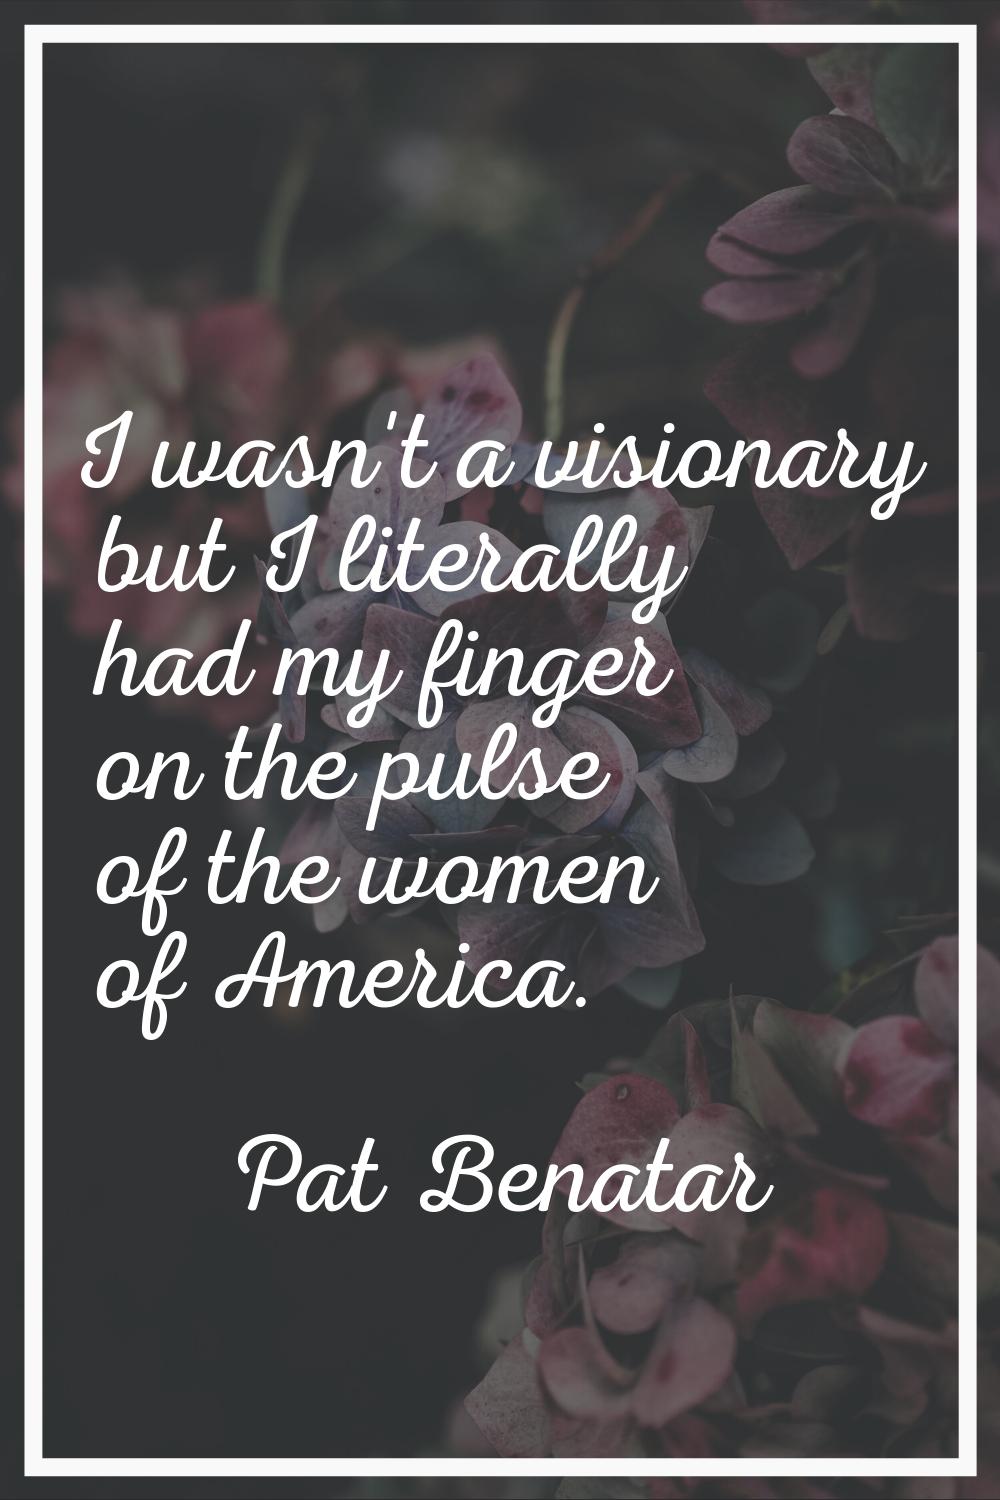 I wasn't a visionary but I literally had my finger on the pulse of the women of America.